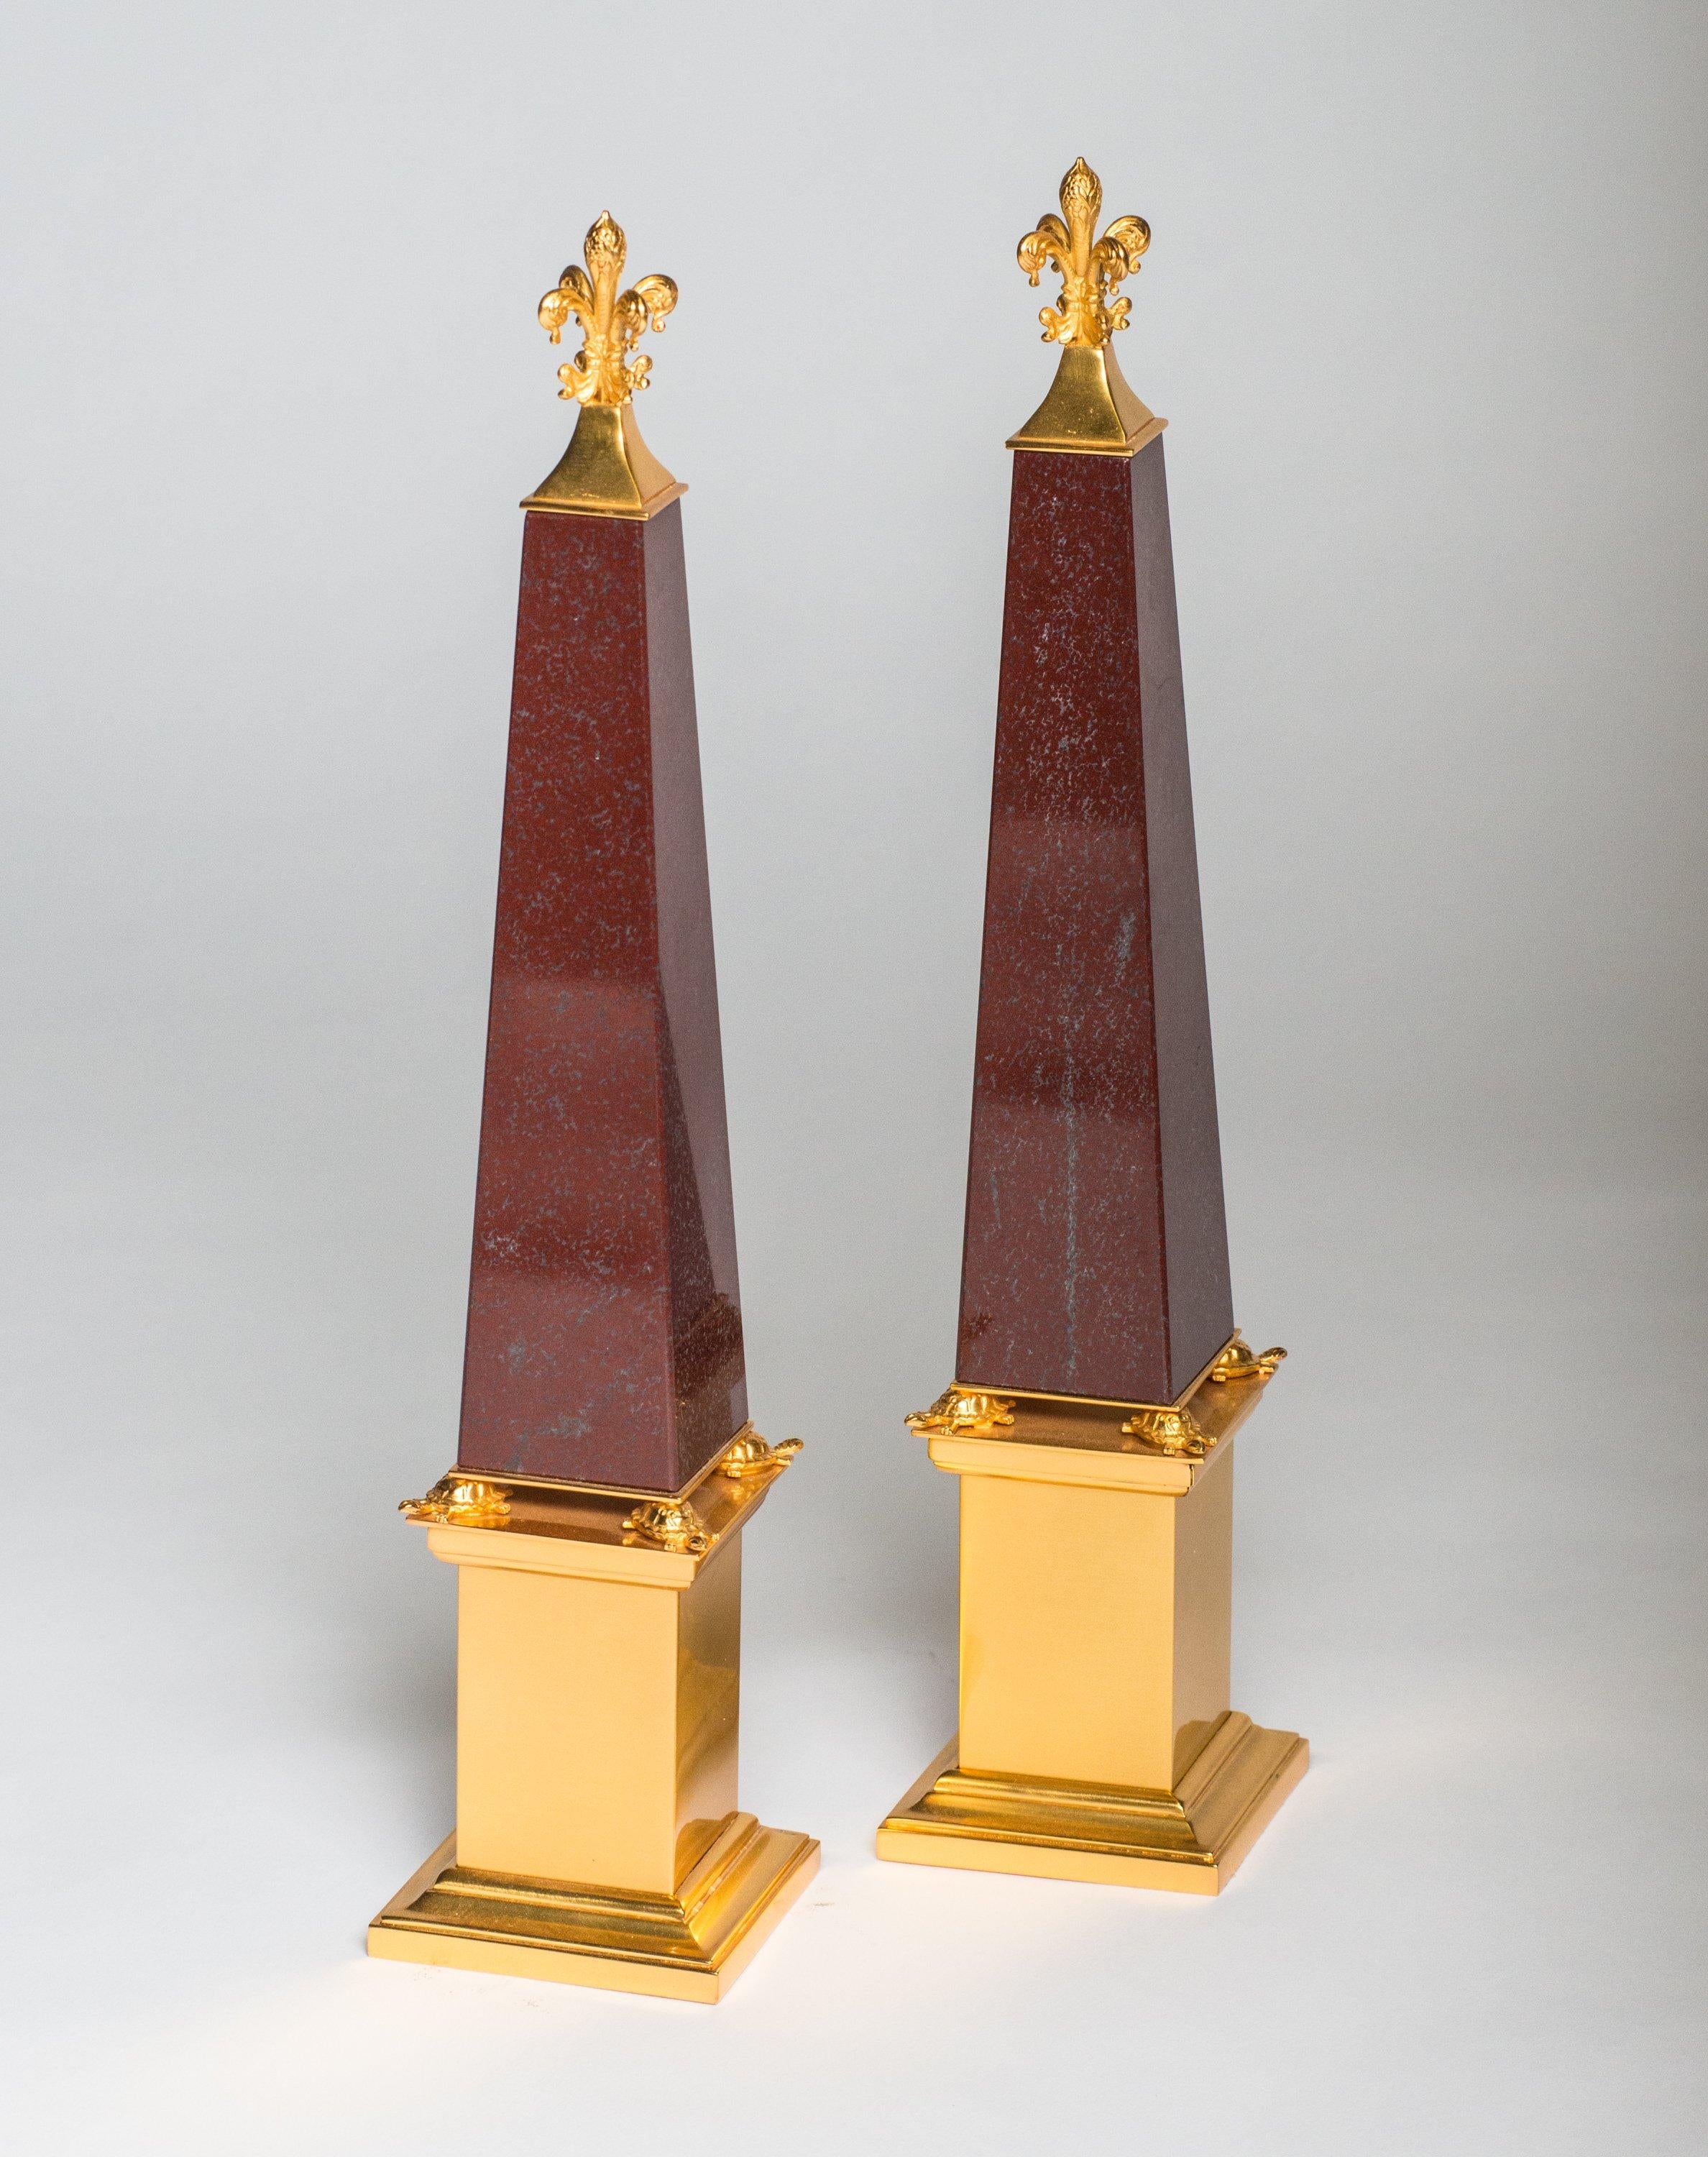 A pair of bronze & red marble obelisks embellished with tortoises made by a master bronze maker in Florence, Italy.